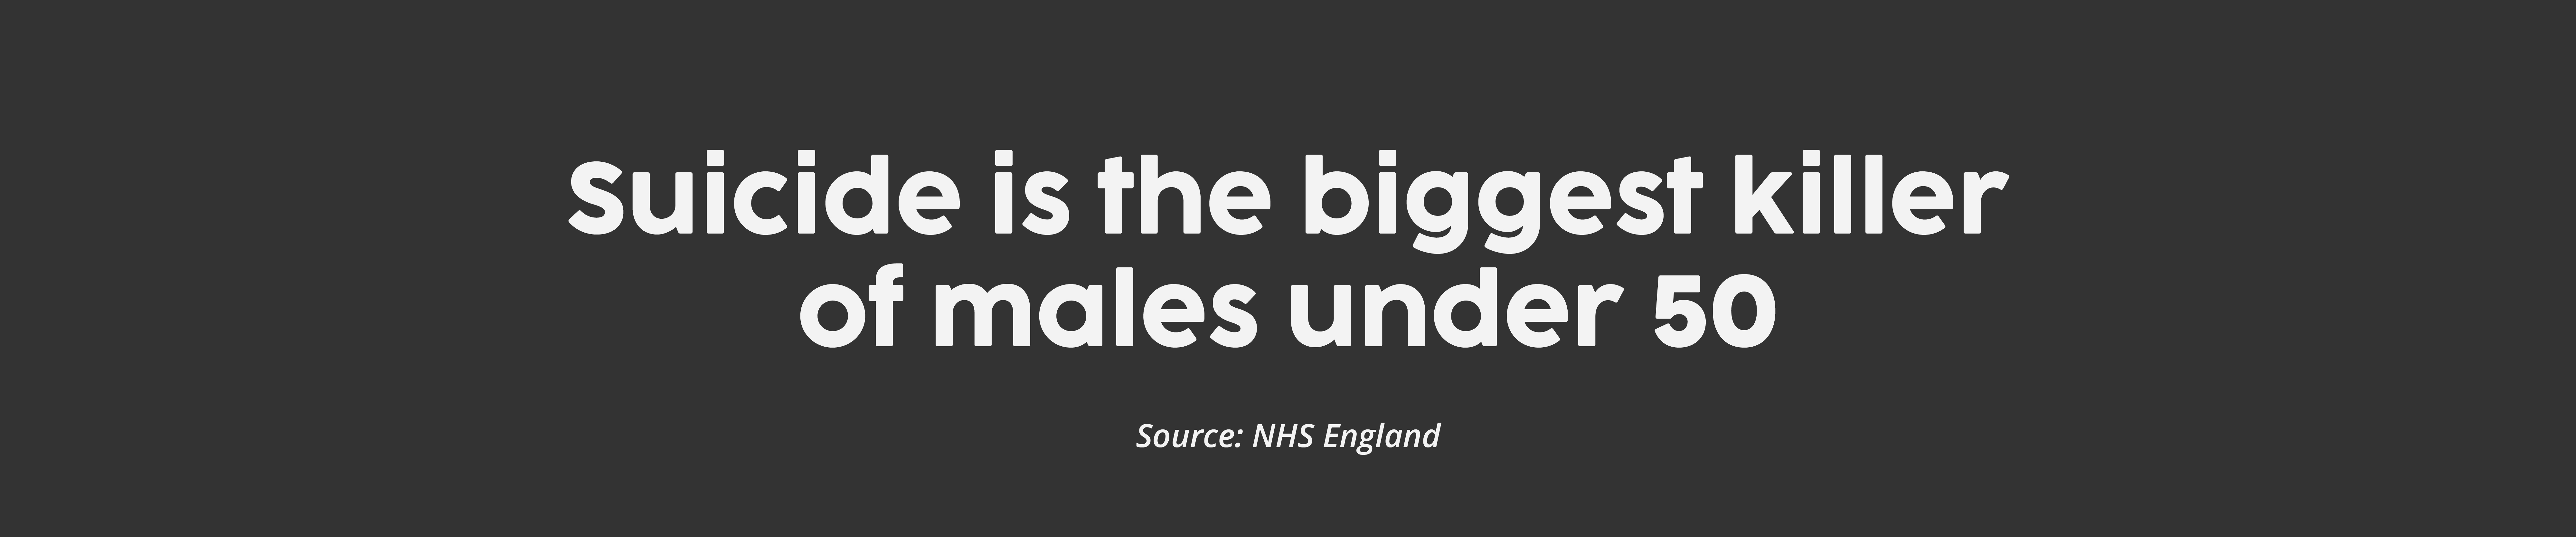 suicide is the biggest killer of males under 50- NHS England